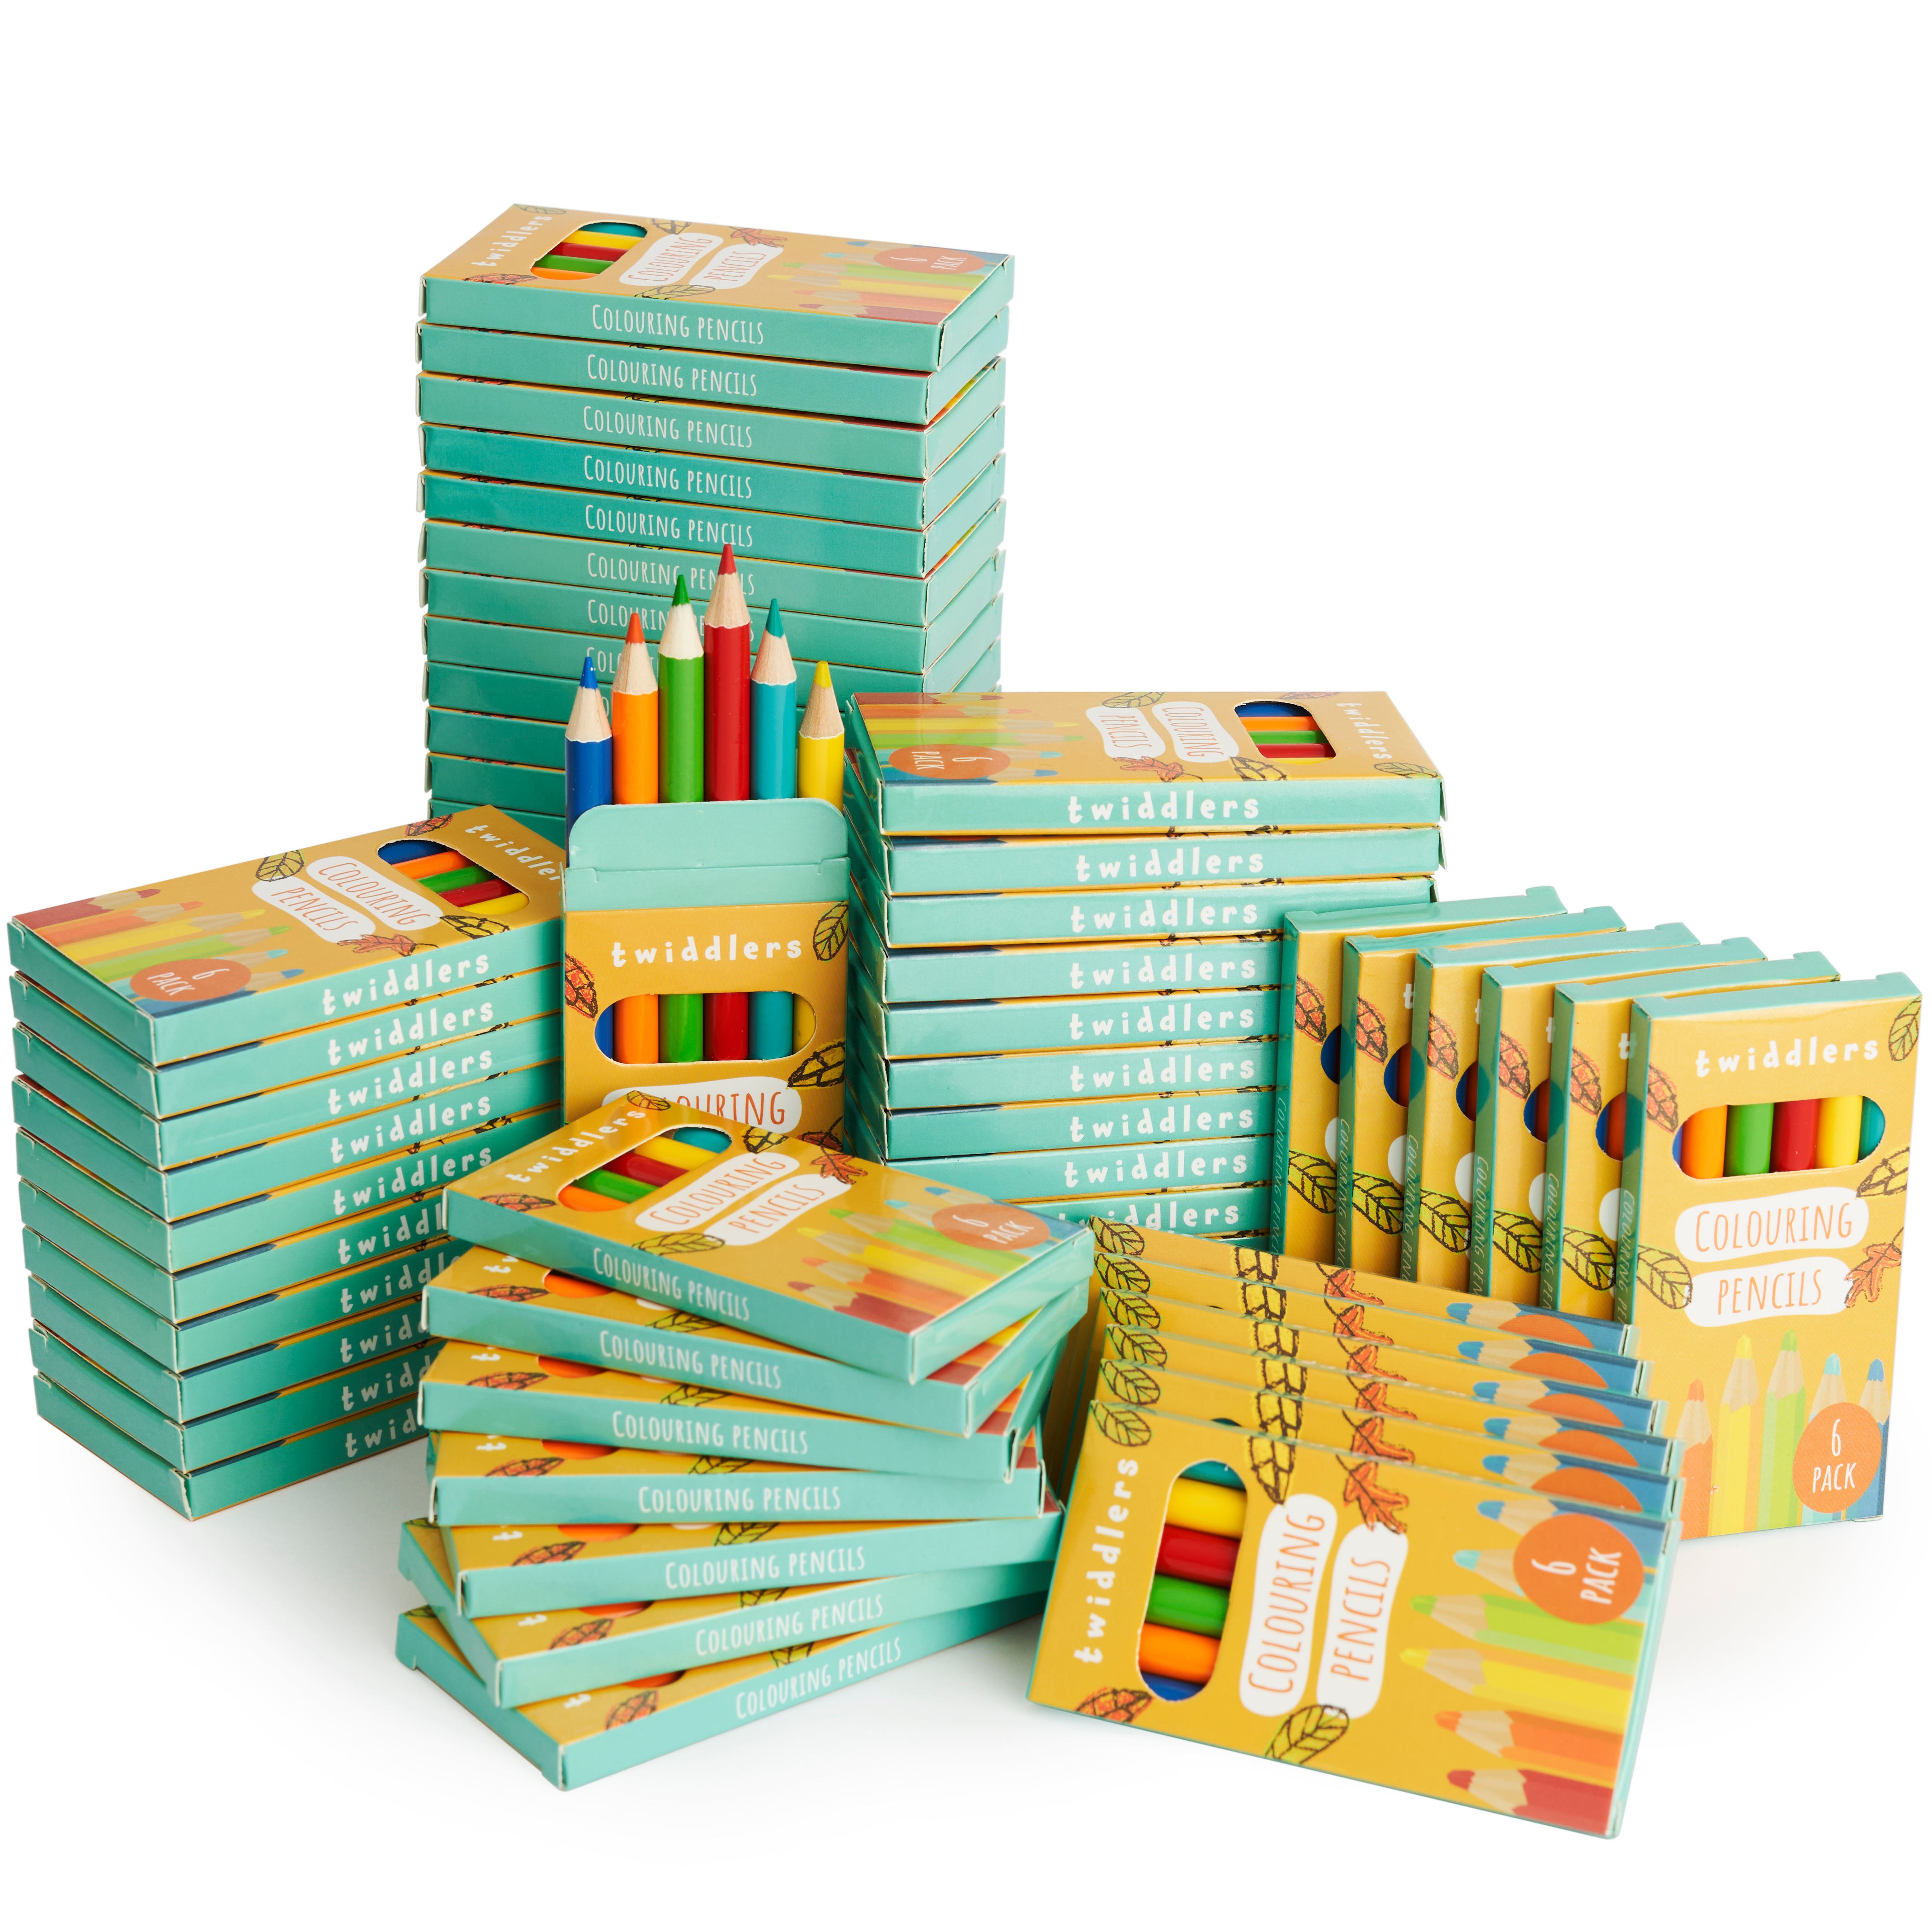 60 Sets of 6 Colouring Pencils